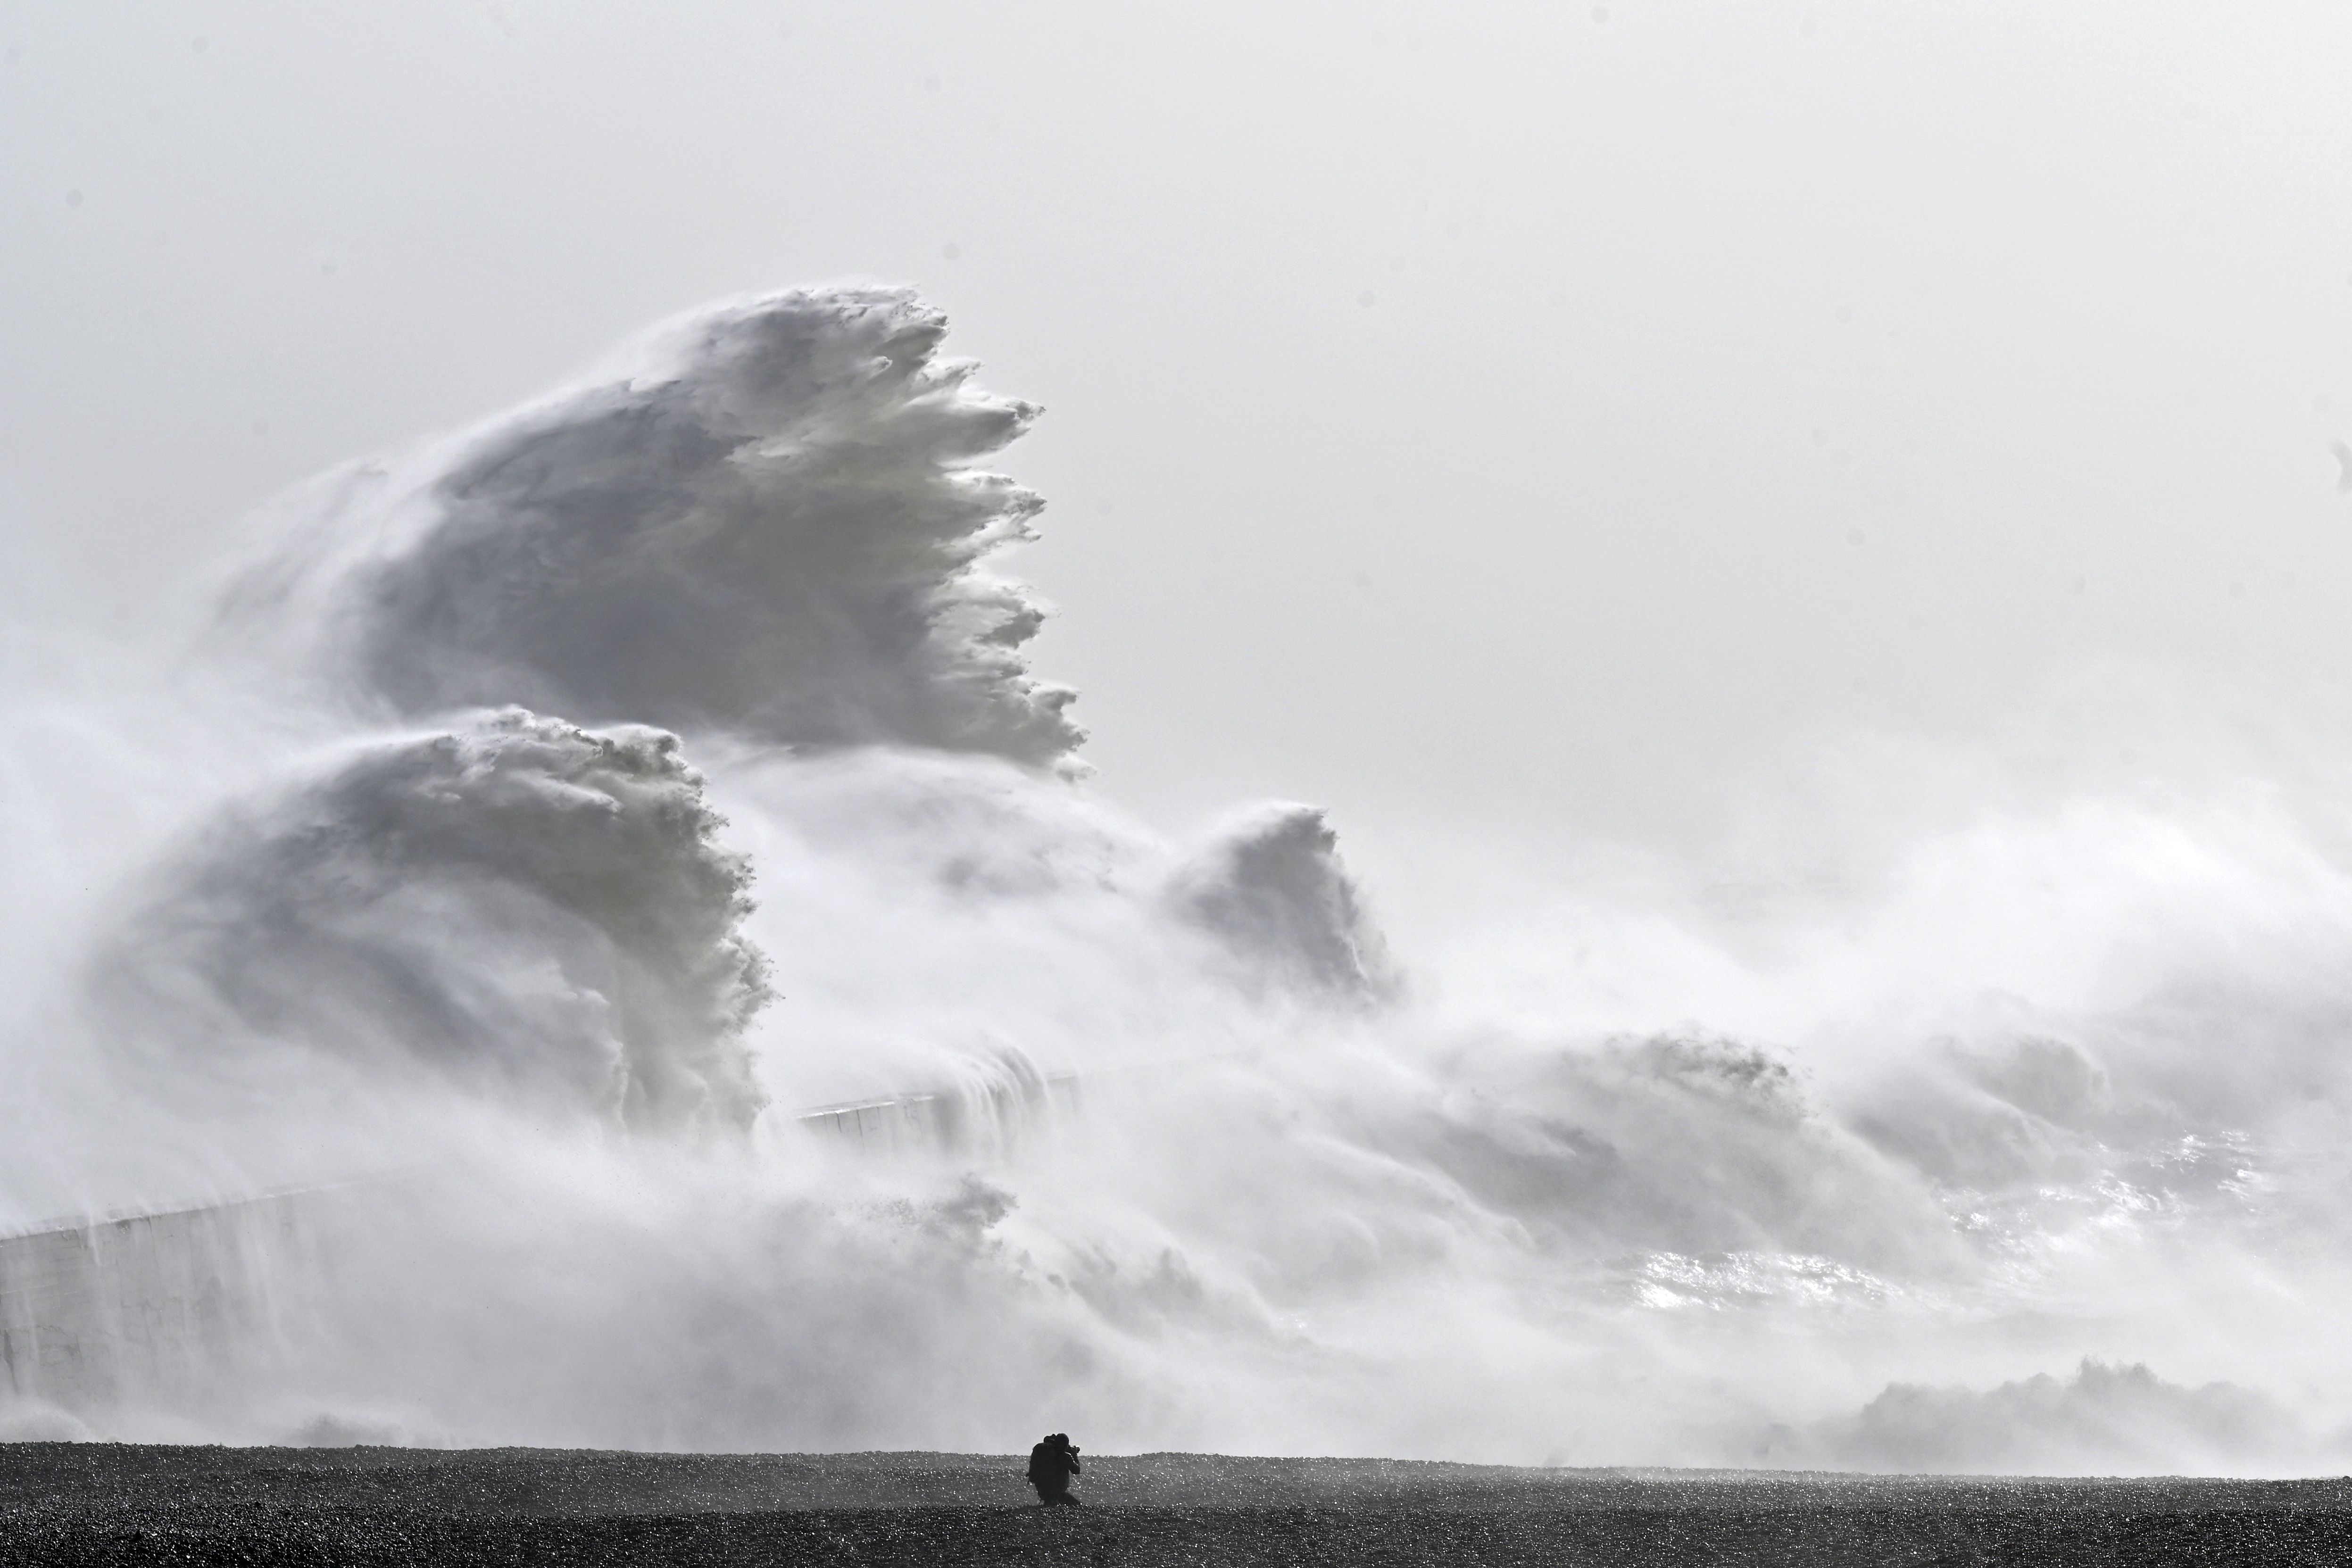 The waves crashed on the wall of Newhaven Harbor in Newhaven, southern England in Feb.  18, as Storm Eunice brought high winds around the country.  Extreme weather events like this one continue to grow as a result of climate change.